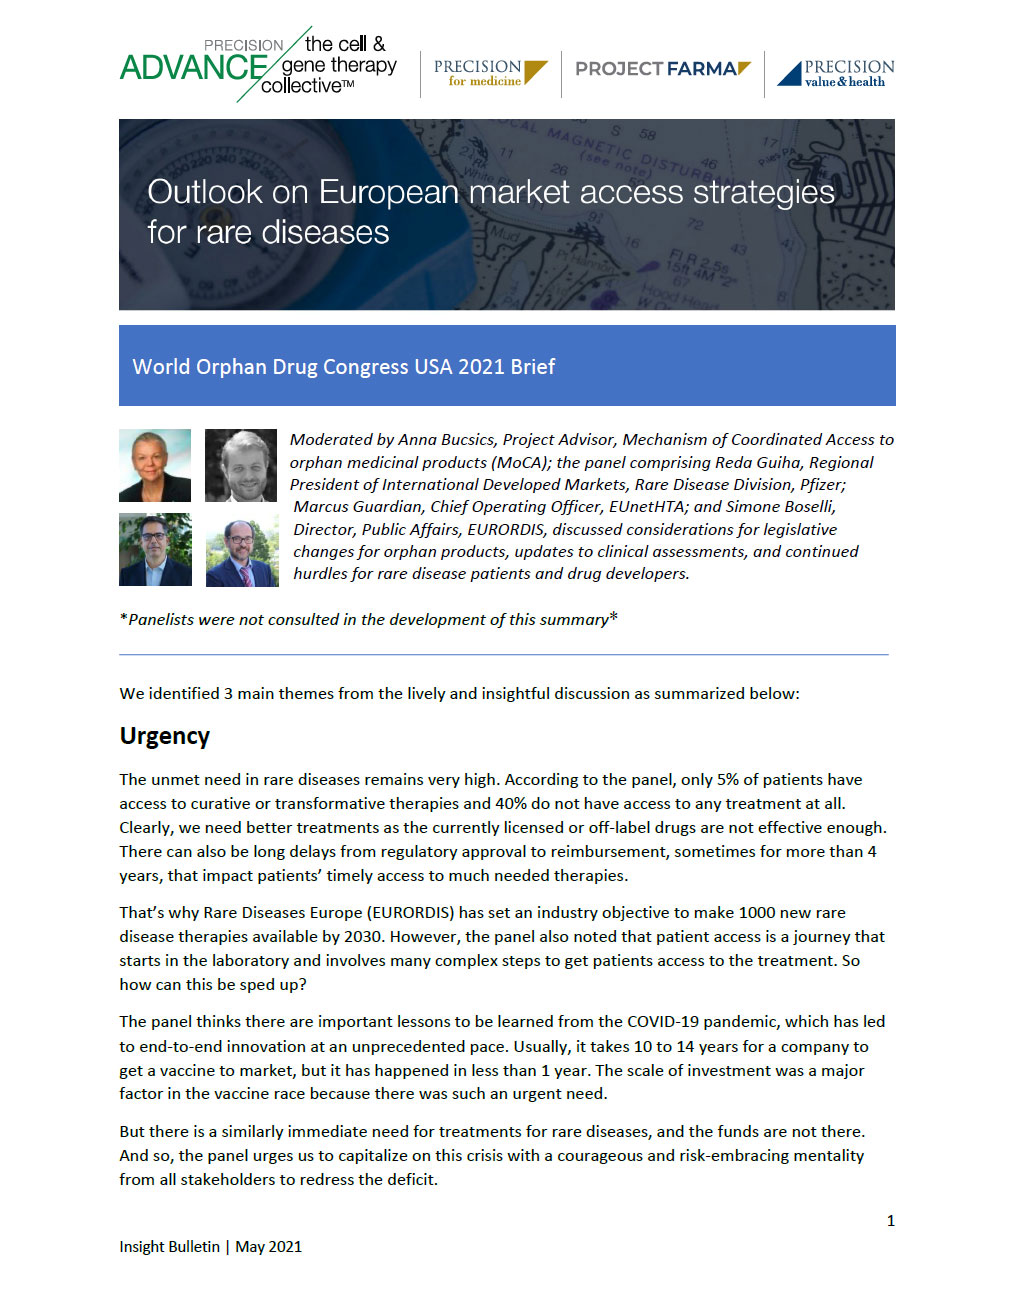 WODC Panel Summary: Outlook on European Market Access Strategies for Rare Diseases brief thumbnail